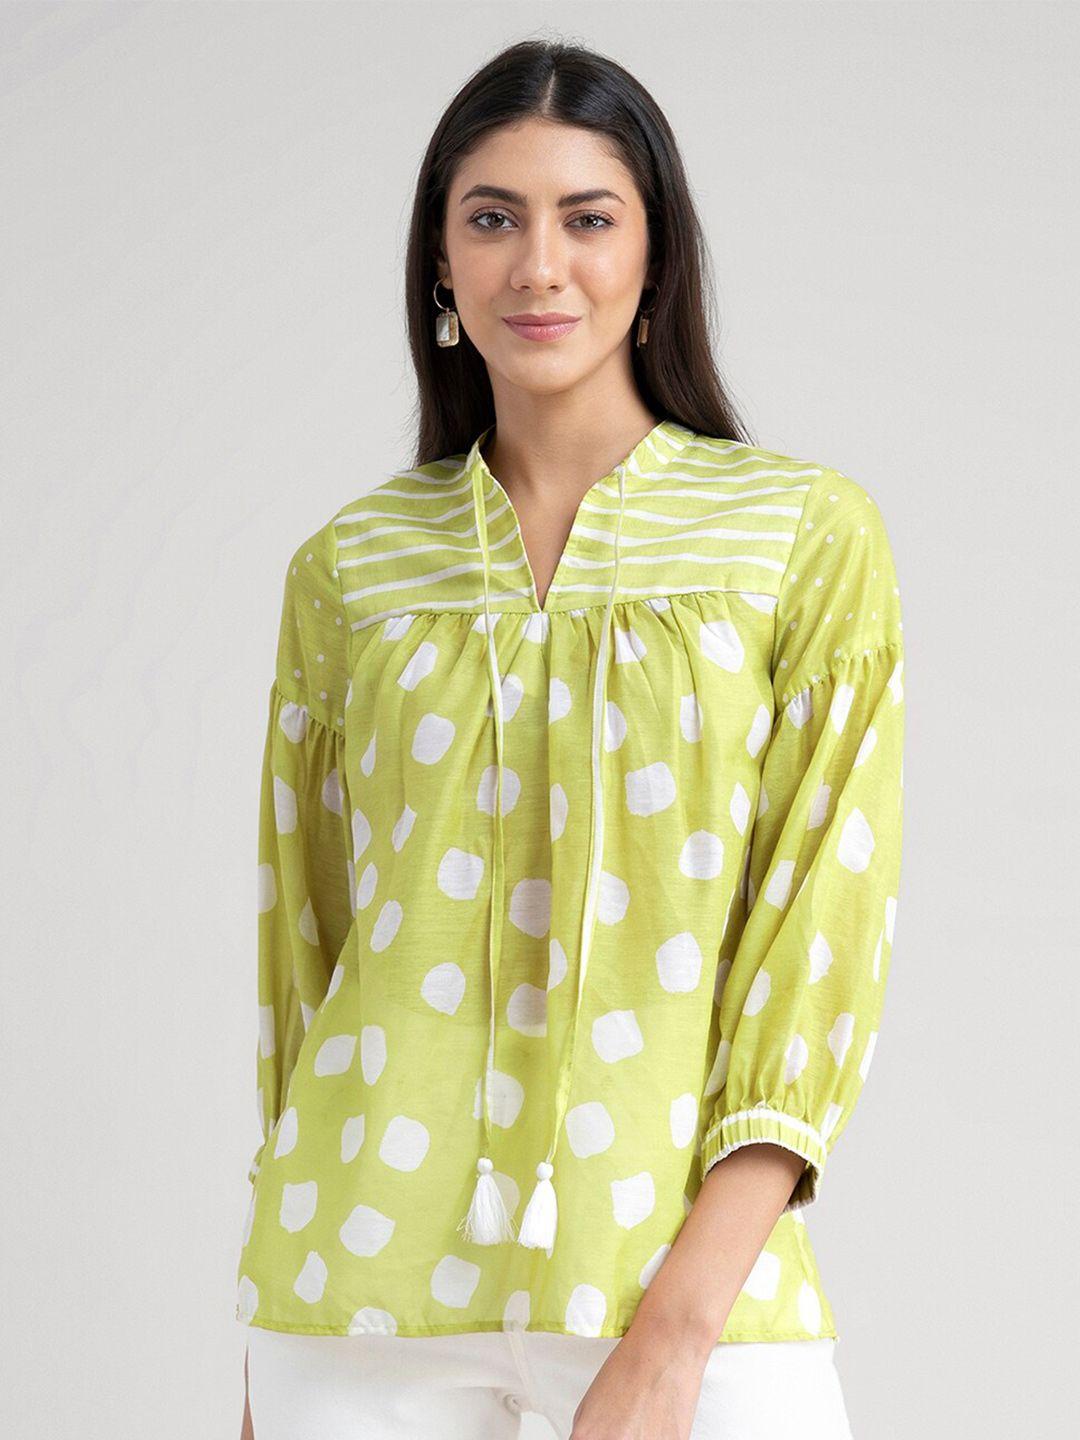 marigold by fablestreet lime green print tie-up neck top